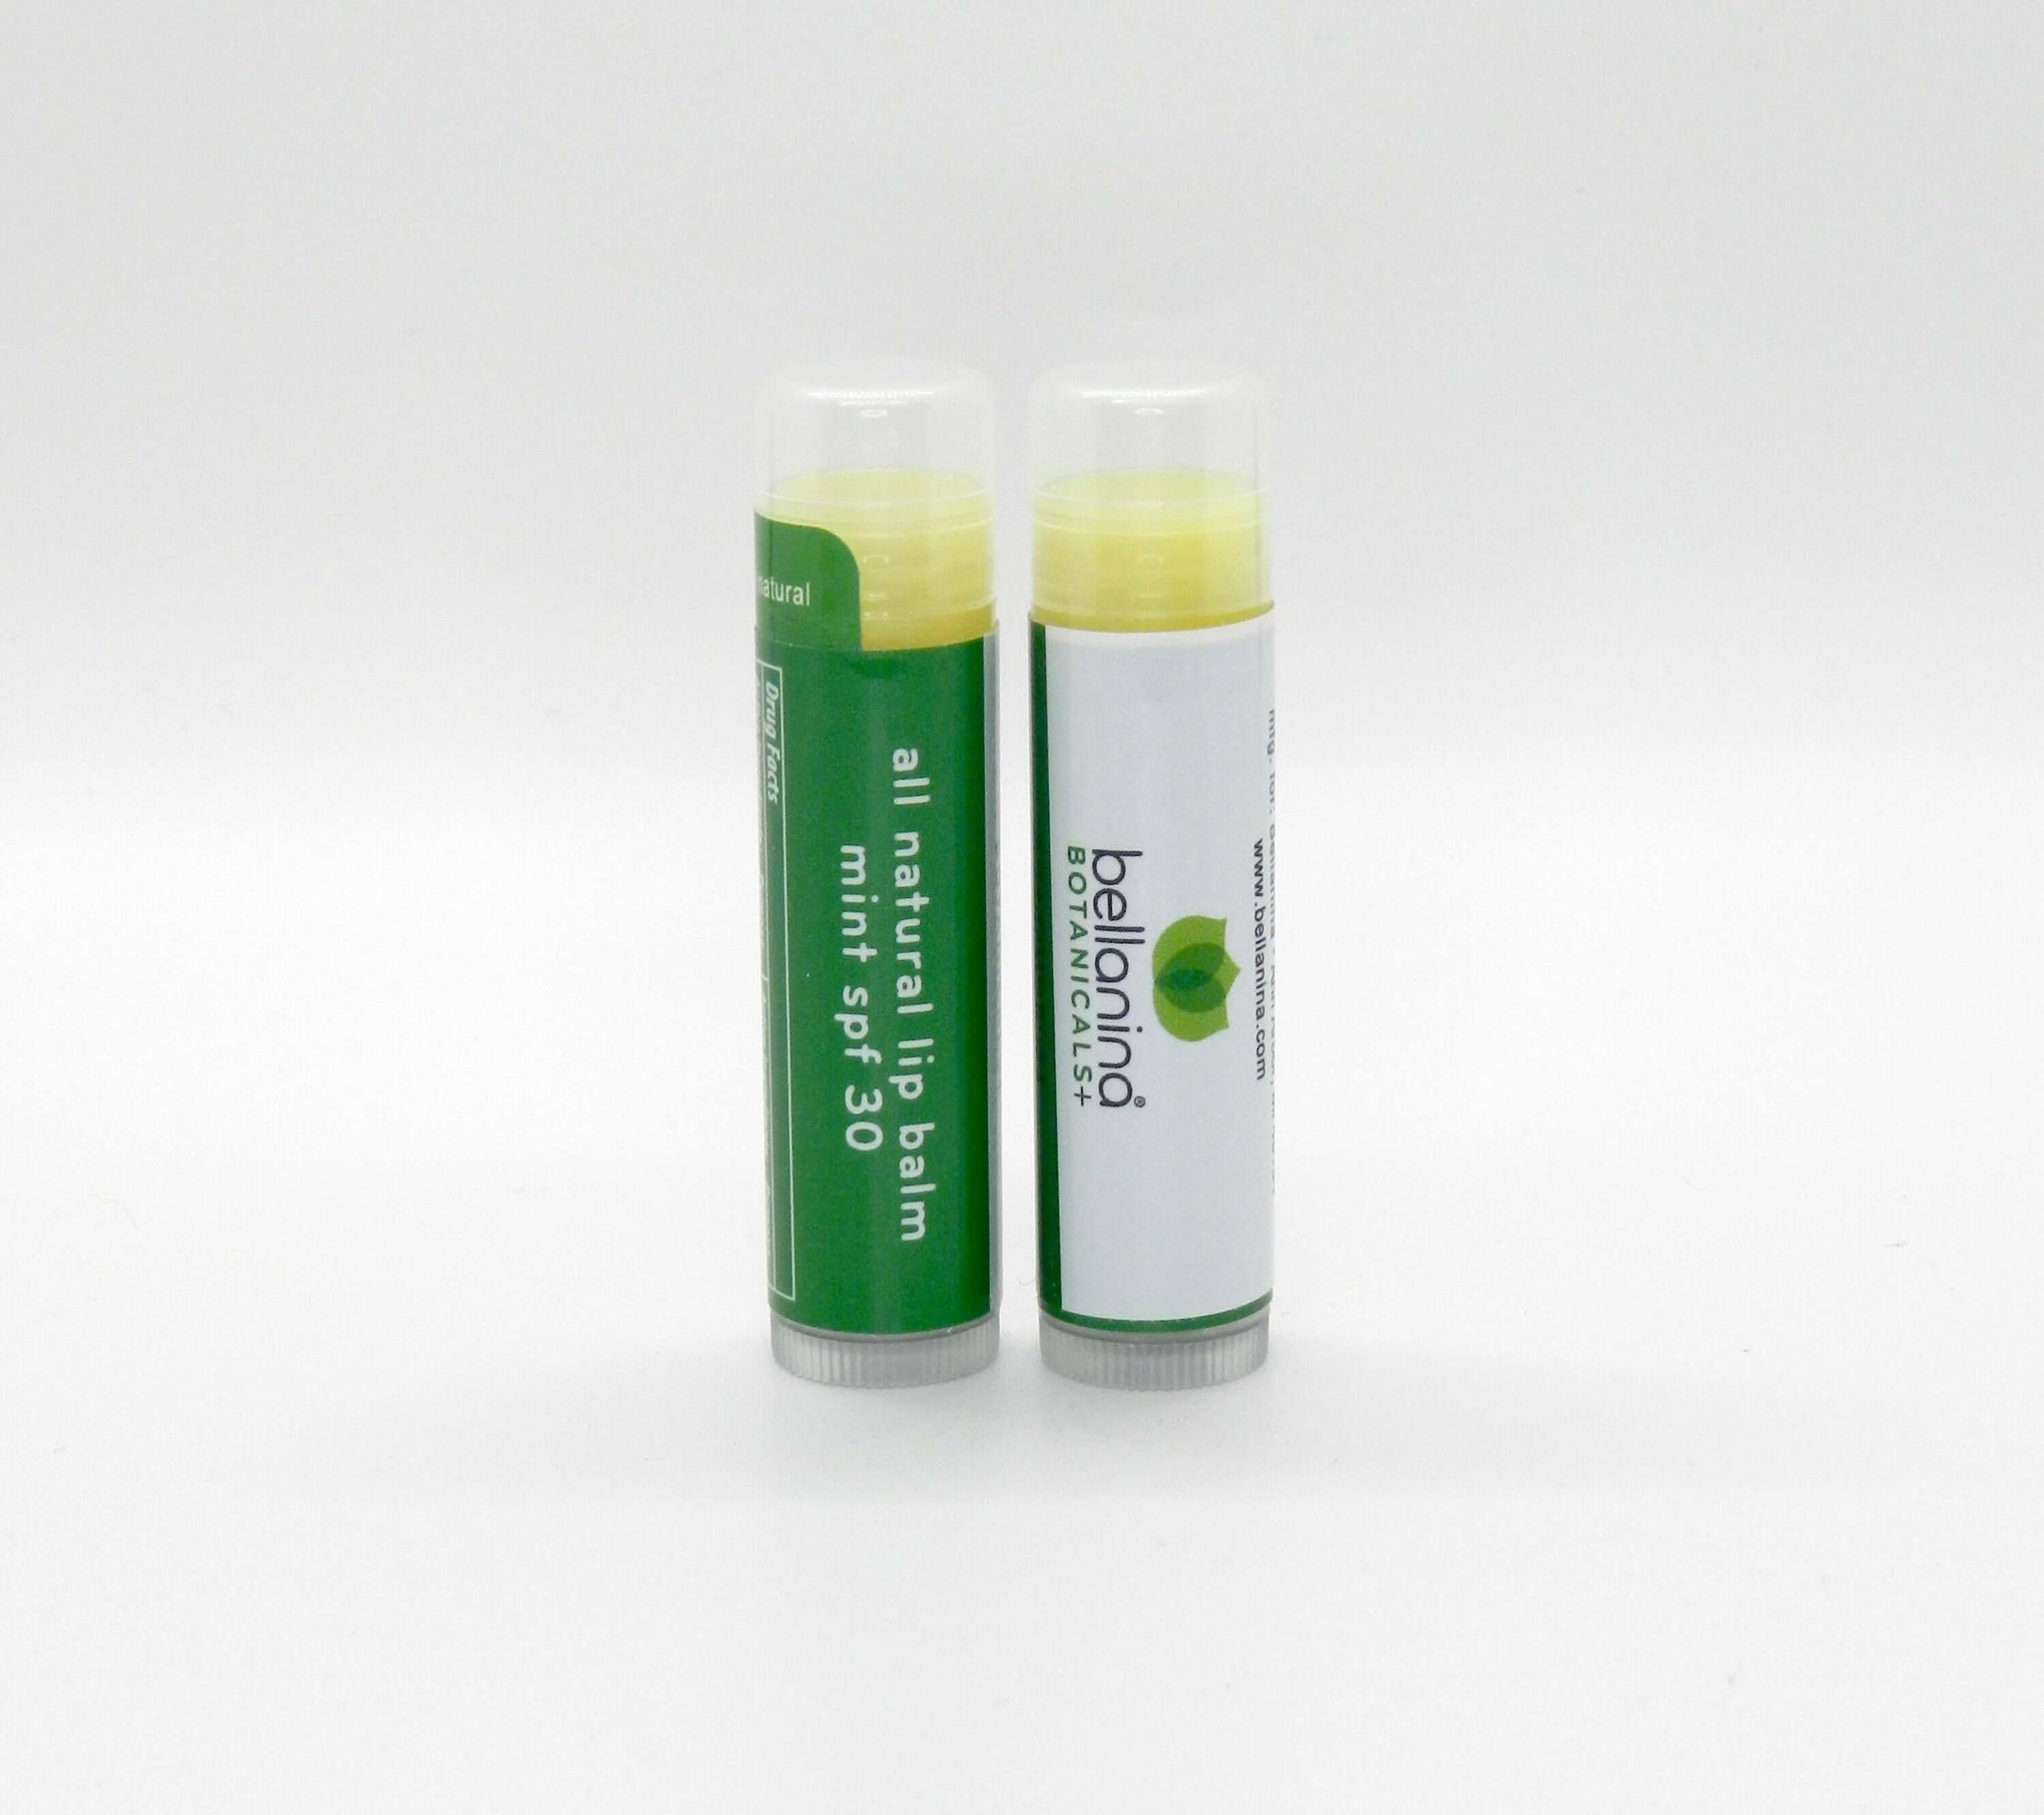 2 tubes of all natural mint lip balm with spf 30